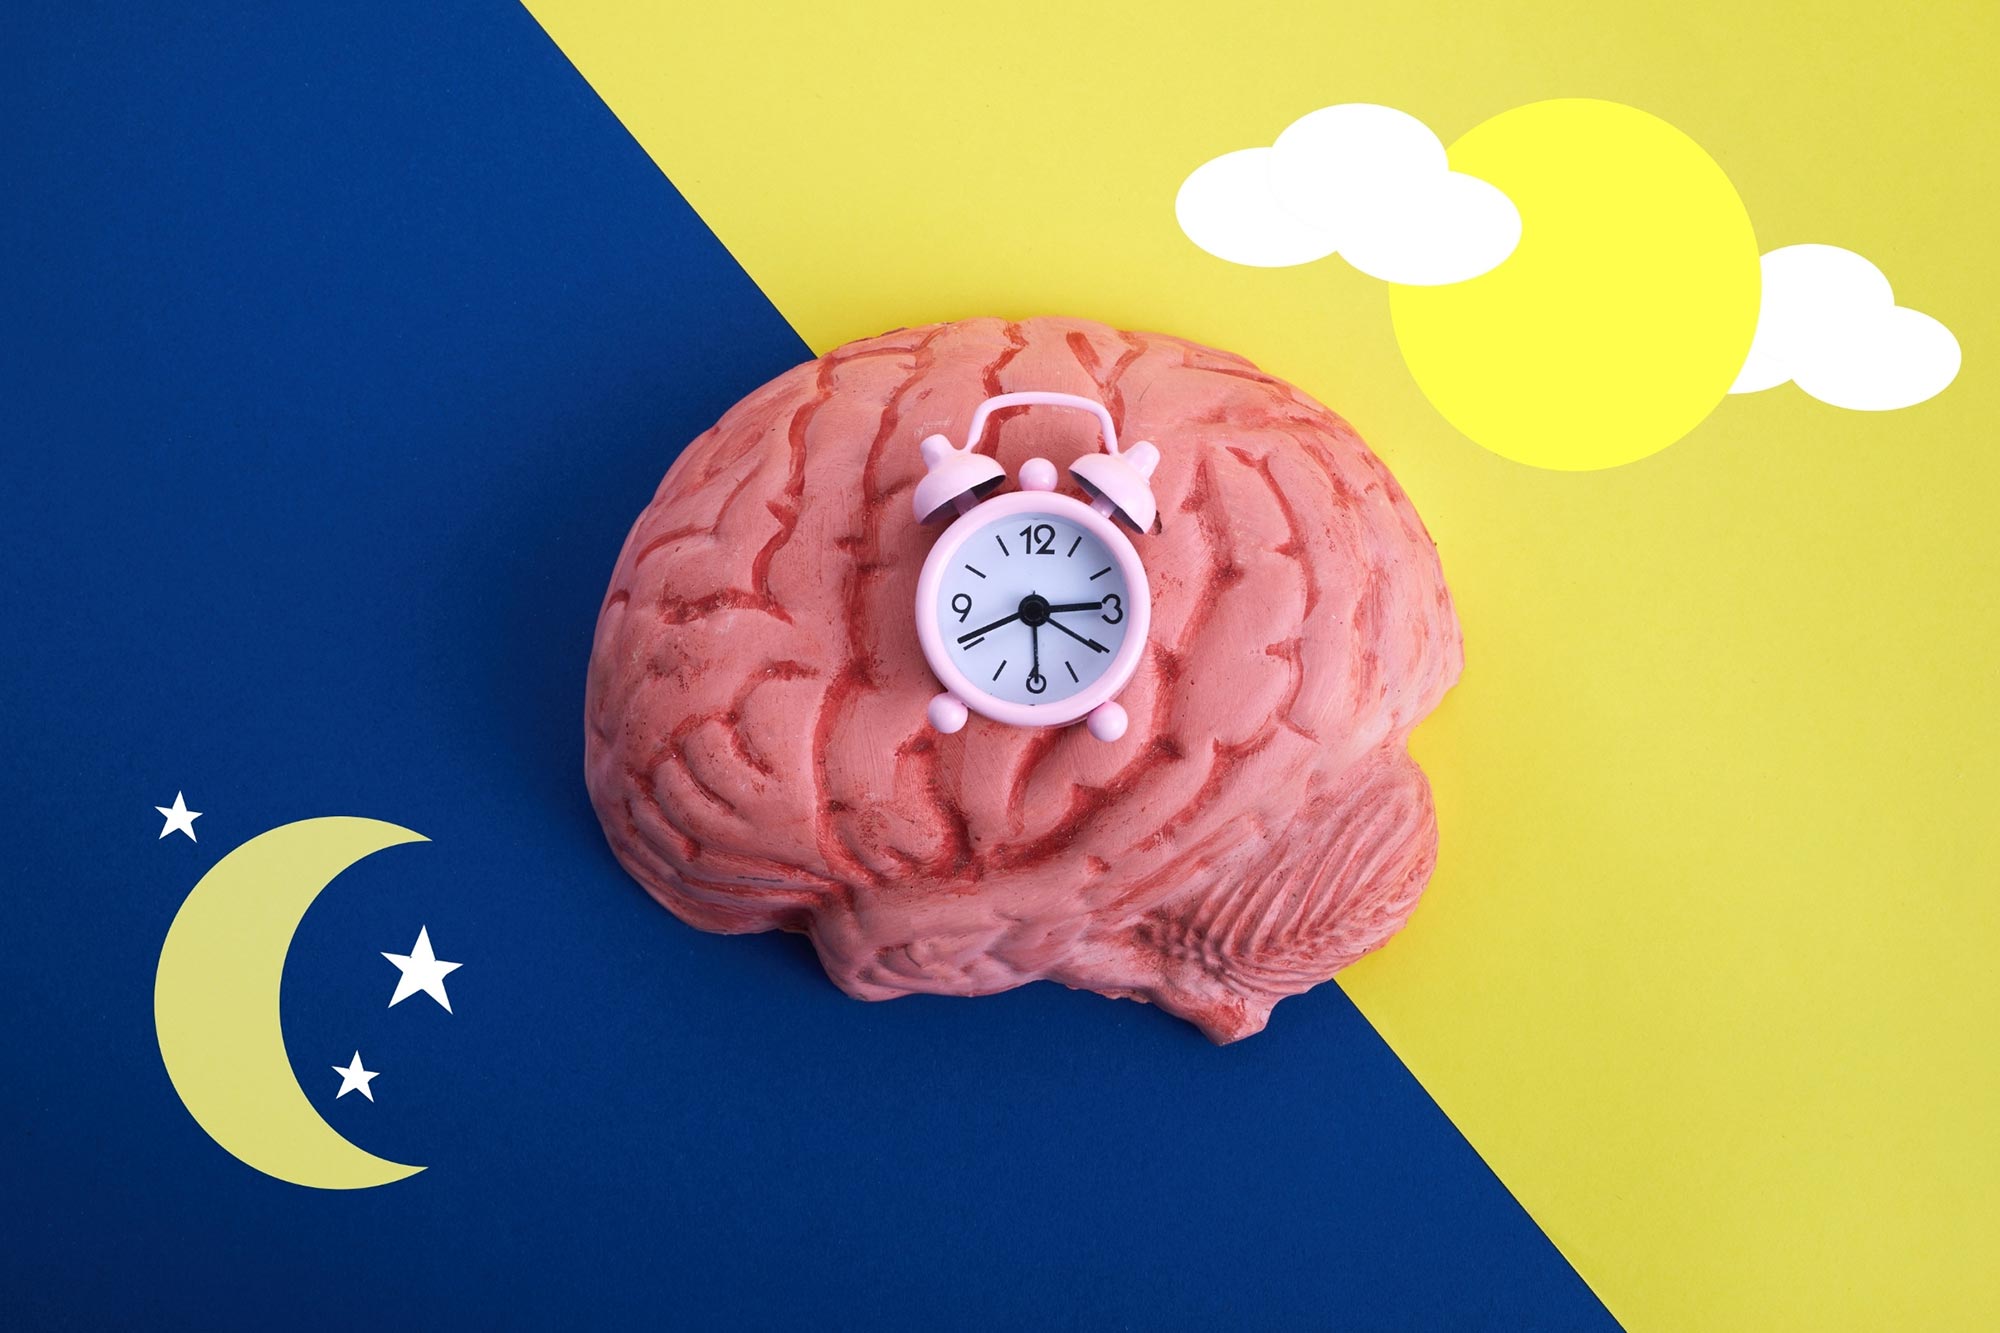 Your Body Has an Internal Clock That Dictates When You Eat, Sleep